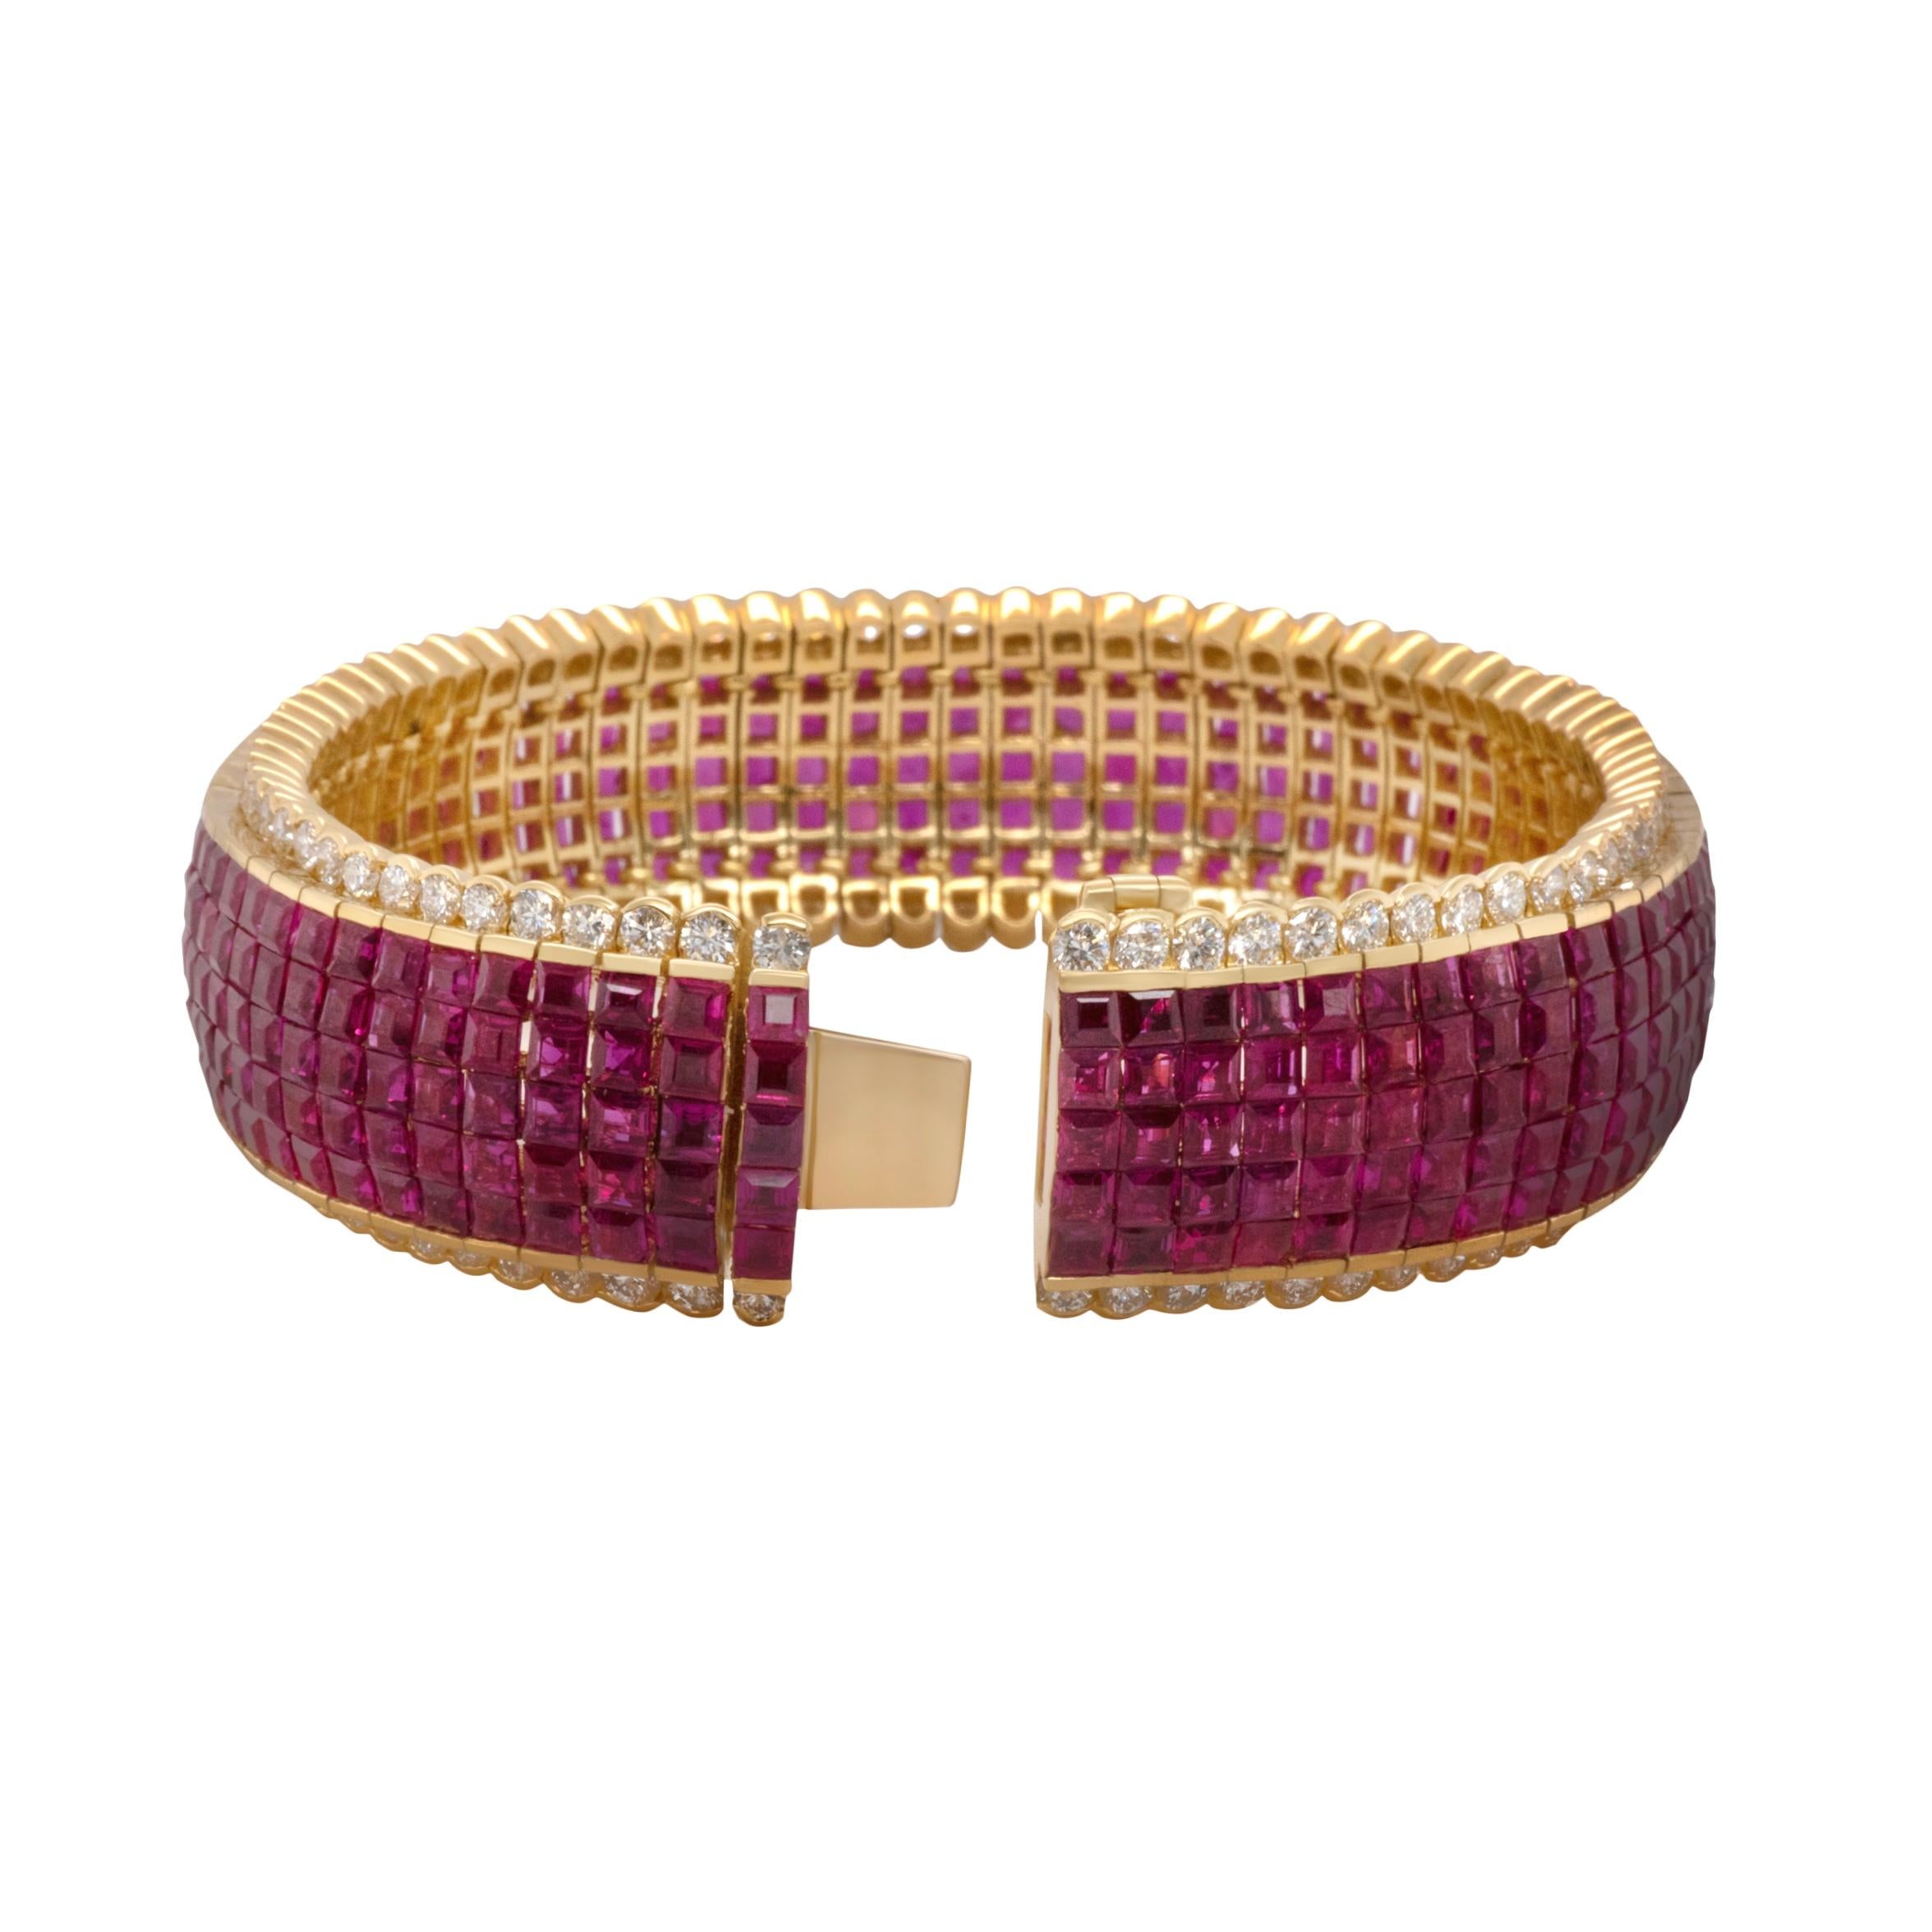 A classic yellow gold invisible set ruby and diamond bracelet.  This piece houses an impressive 370 pieces of natural square cut rubies in five rows of invisible setting surrounded by 148 bezel set round white diamonds. 

Ruby 370 pcs.
Size 2.5